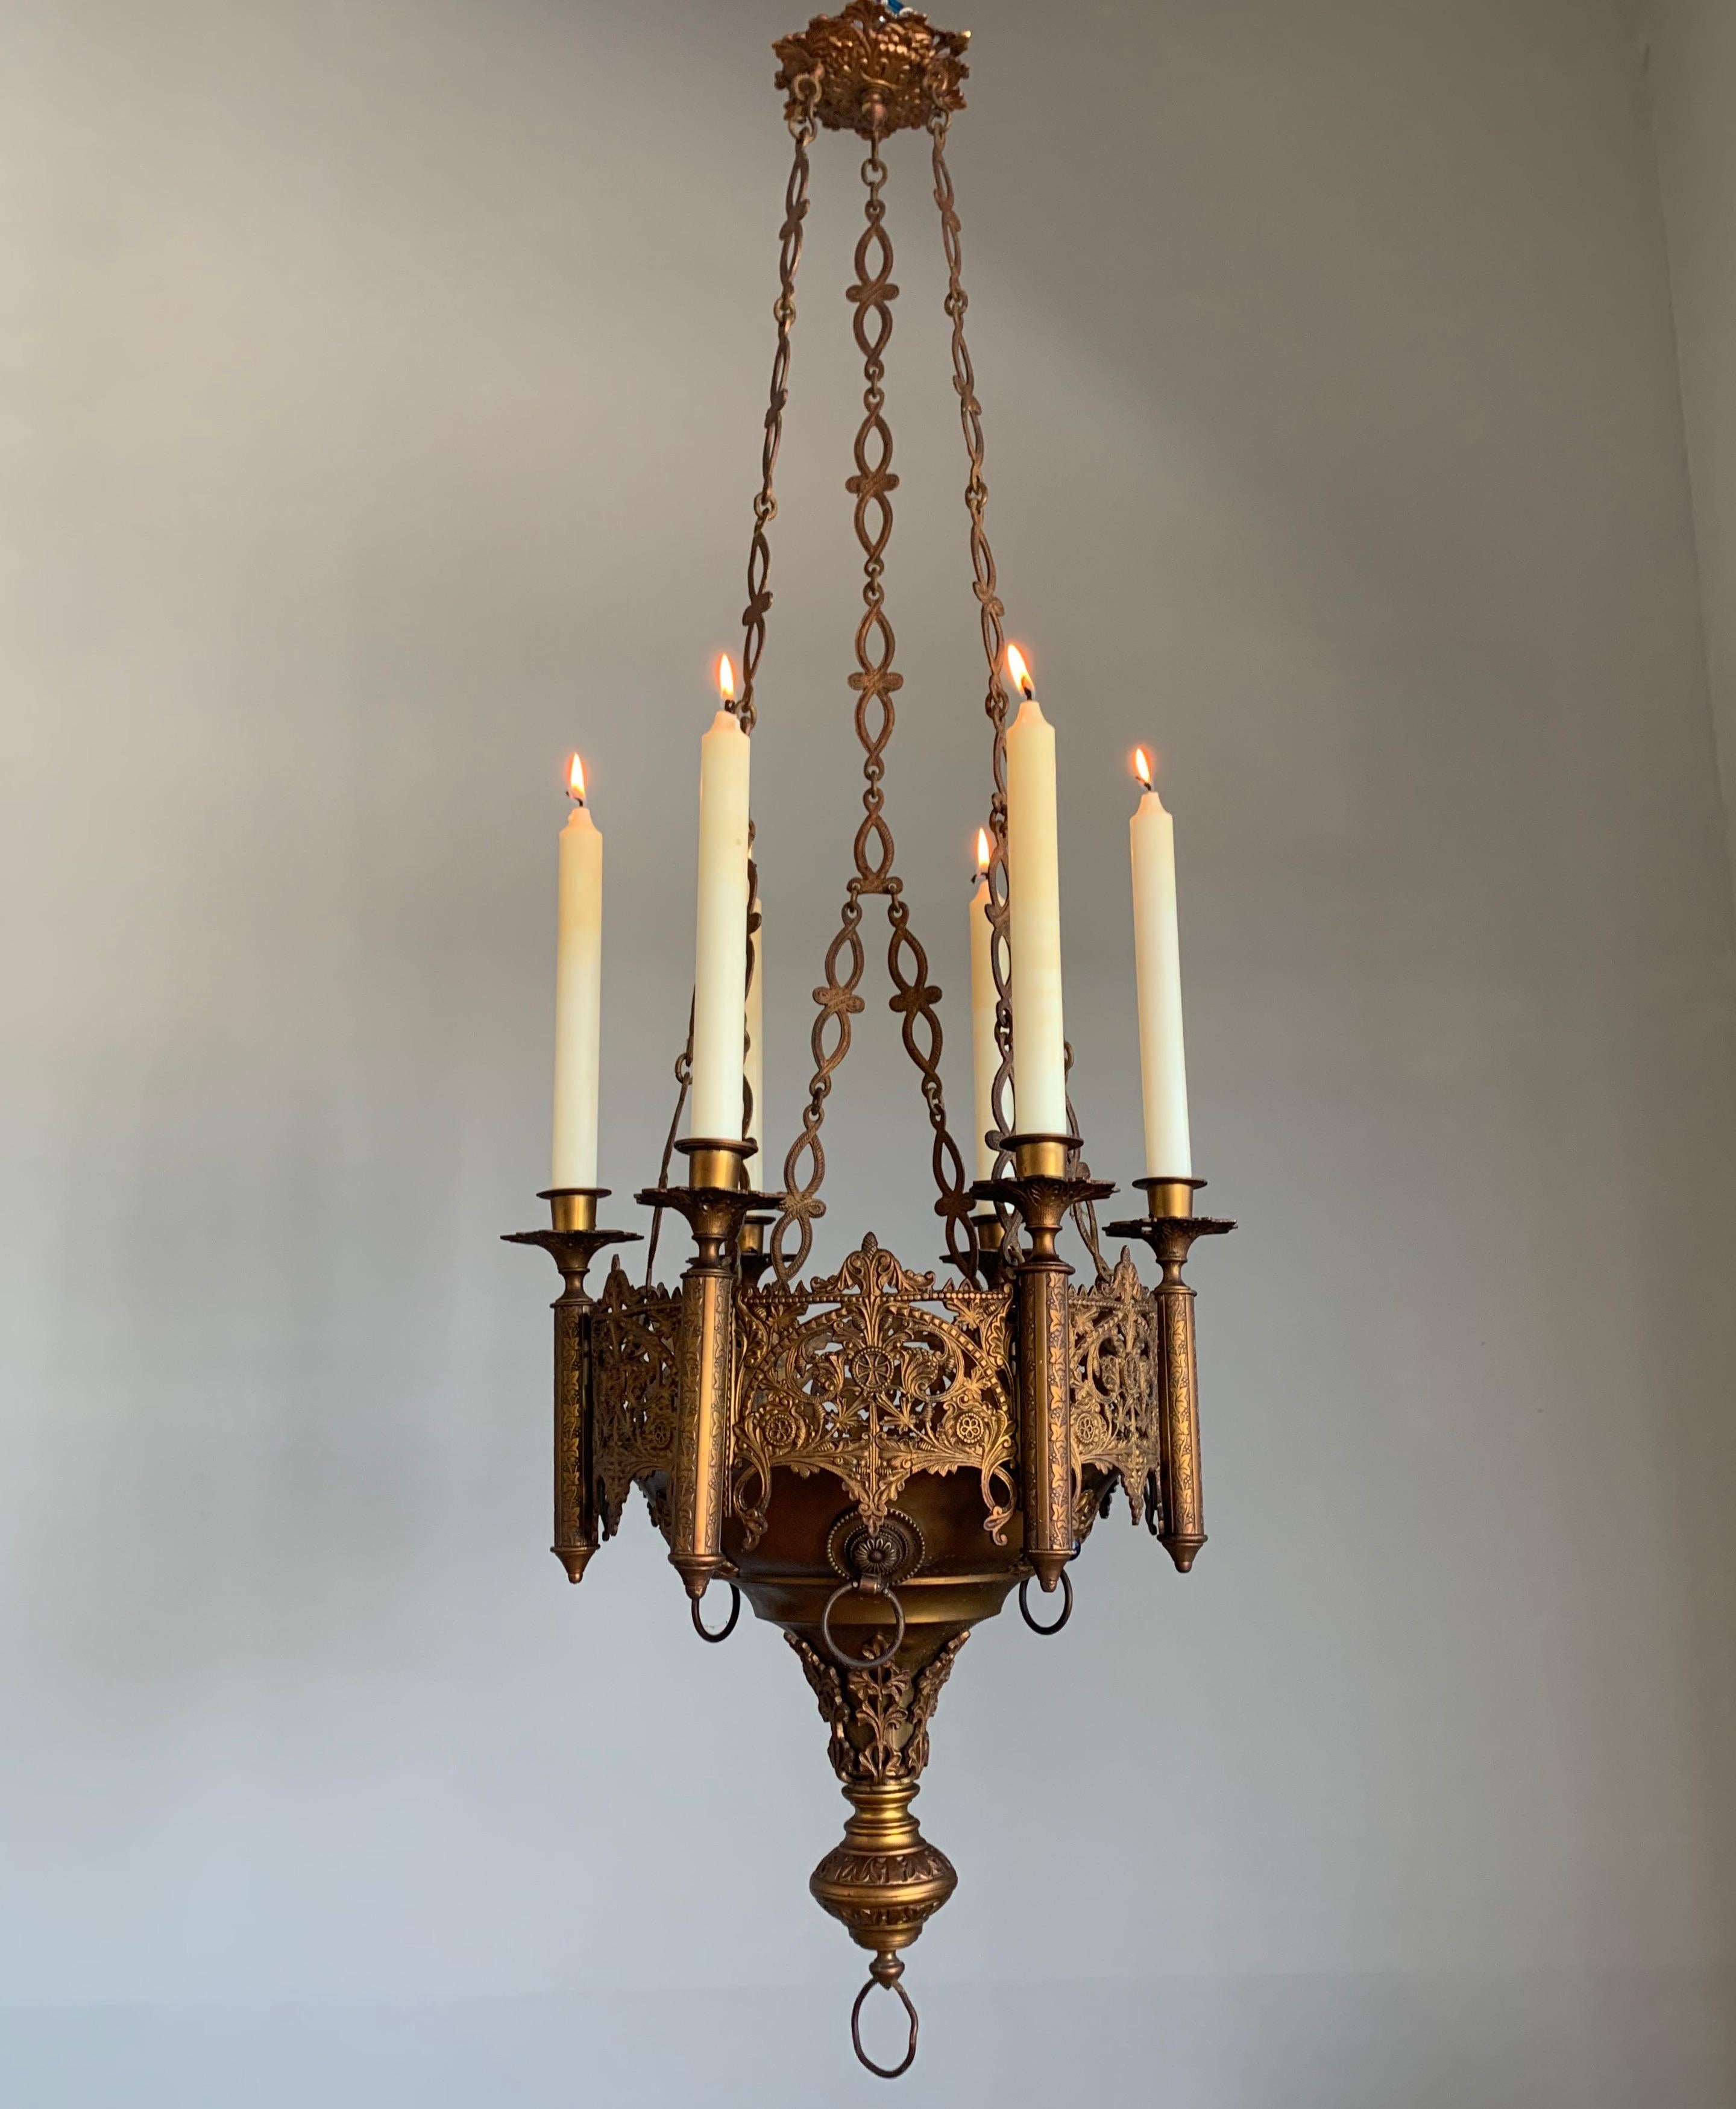 Stunning and all handcrafted church sanctuary light with glass gem stone inserts.

If you have a Gothic style interior then this six candles chandelier will look great wherever you decide to hang it. This particularly fine specimen comes with a wide